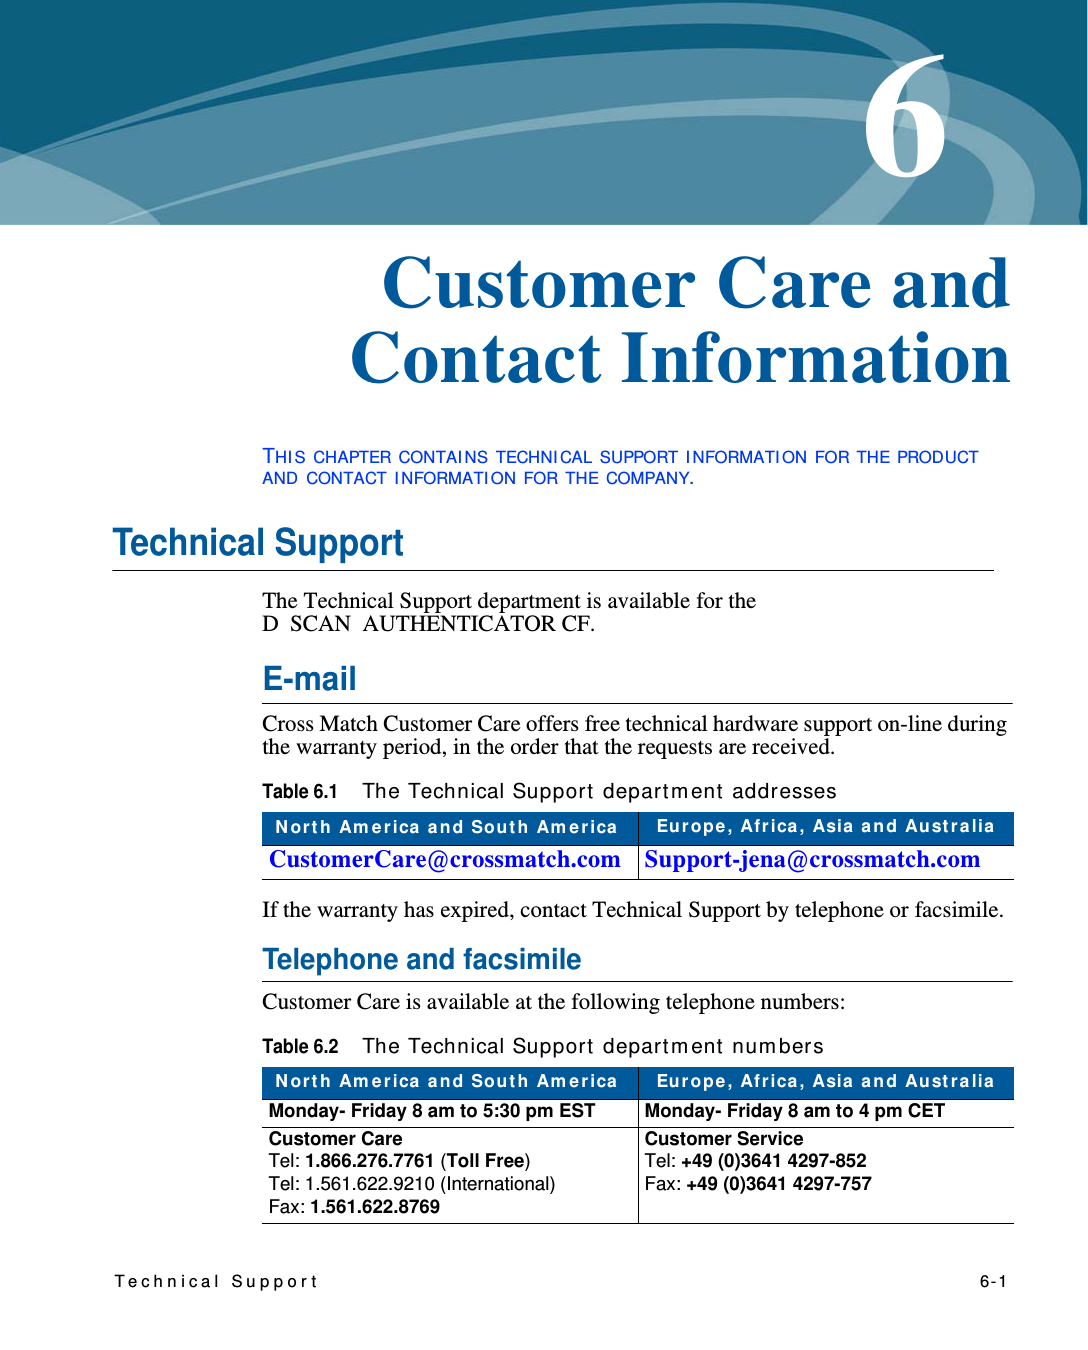 Technical Support   6-16Chapter 0Customer Care and Contact InformationTHI S CHAPTER CONTAI NS TECHNI CAL SUPPORT I NFORMATI ON FOR THE PRODUCT AND CONTACT I NFORMATI ON FOR THE COMPANY.Technical SupportThe Technical Support department is available for the D  SCAN AUTHENTICATOR CF.E-mailCross Match Customer Care offers free technical hardware support on-line during the warranty period, in the order that the requests are received.If the warranty has expired, contact Technical Support by telephone or facsimile.Telephone and facsimileCustomer Care is available at the following telephone numbers:Table 6.1The Technical Support  depart m ent addressesN orth Am erica  a nd Sou t h Am erica  Eu rope , Africa , Asia  a n d Au st ra liaCustomerCare@crossmatch.com Support-jena@crossmatch.comTable 6.2The Technical Support  departm ent  num bersN orth Am erica  a nd Sou t h Am erica  Europe, Africa, Asia  a nd Au st ra liaMonday- Friday 8 am to 5:30 pm EST Monday- Friday 8 am to 4 pm CETCustomer CareTel: 1.866.276.7761 (Toll Free)Tel: 1.561.622.9210 (International)Fax: 1.561.622.8769Customer ServiceTel: +49 (0)3641 4297-852Fax: +49 (0)3641 4297-757